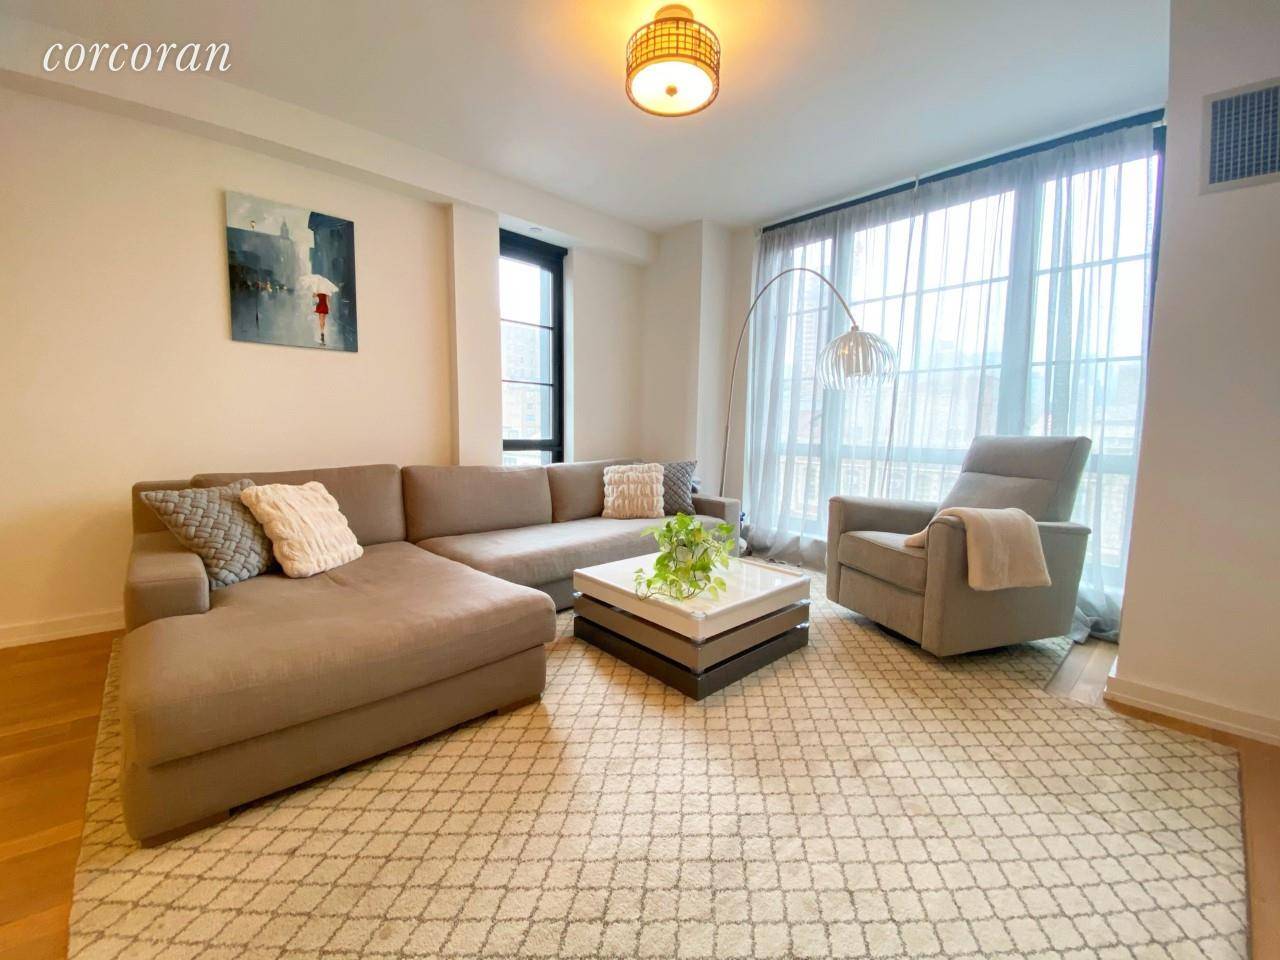 This beautiful three bedroom, two and a half bathroom home, in a newly constructed luxury condo, offers panoramic floor to ceiling, industrial style, square casement windows framing iconic, sweeping Manhattan ...